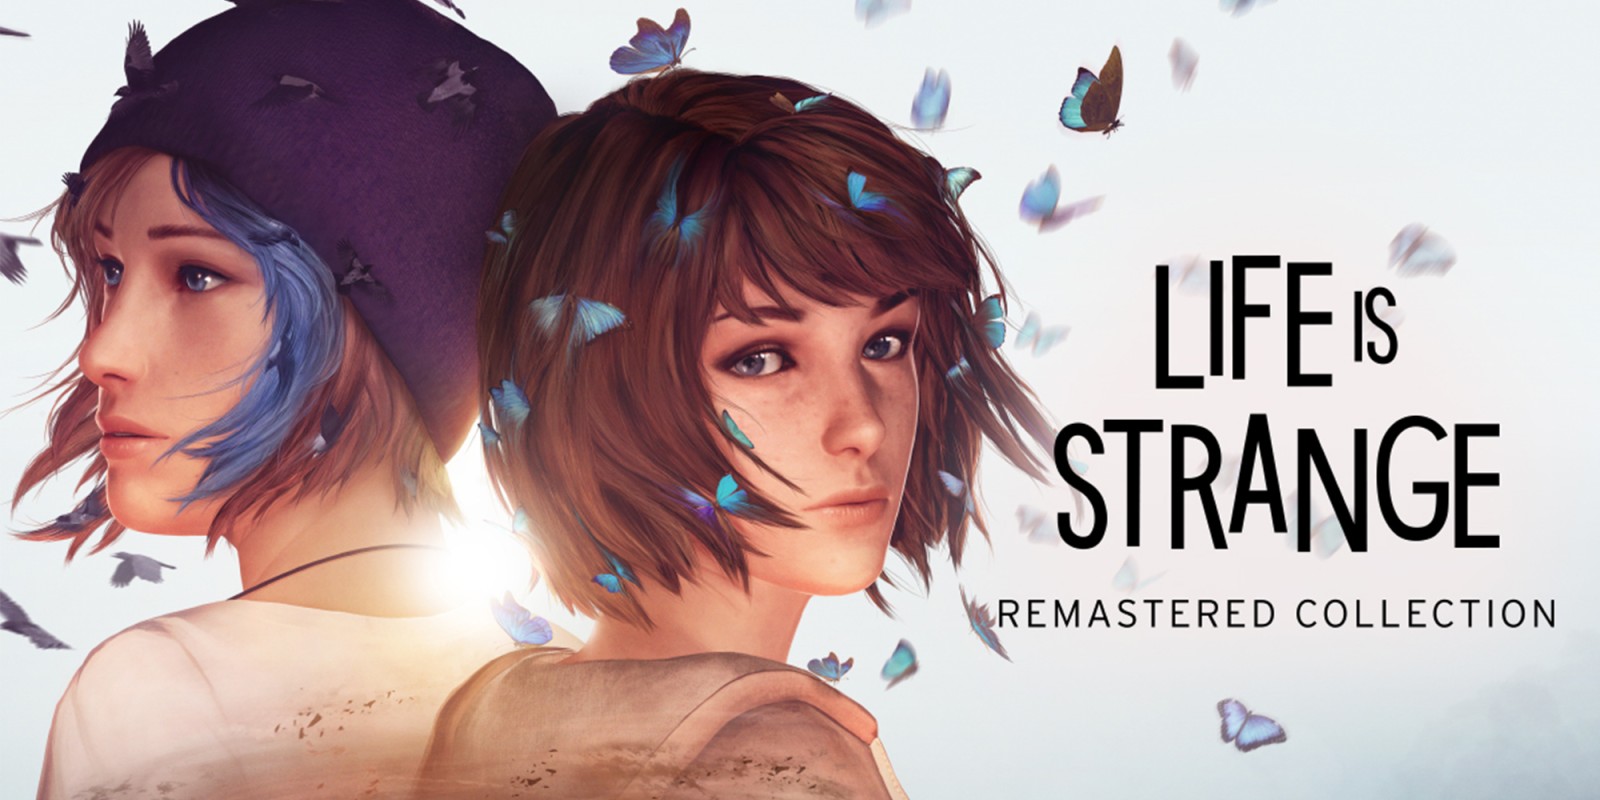 Nintendo Switch version of Life is Strange Remastered Collection delayed until later this year